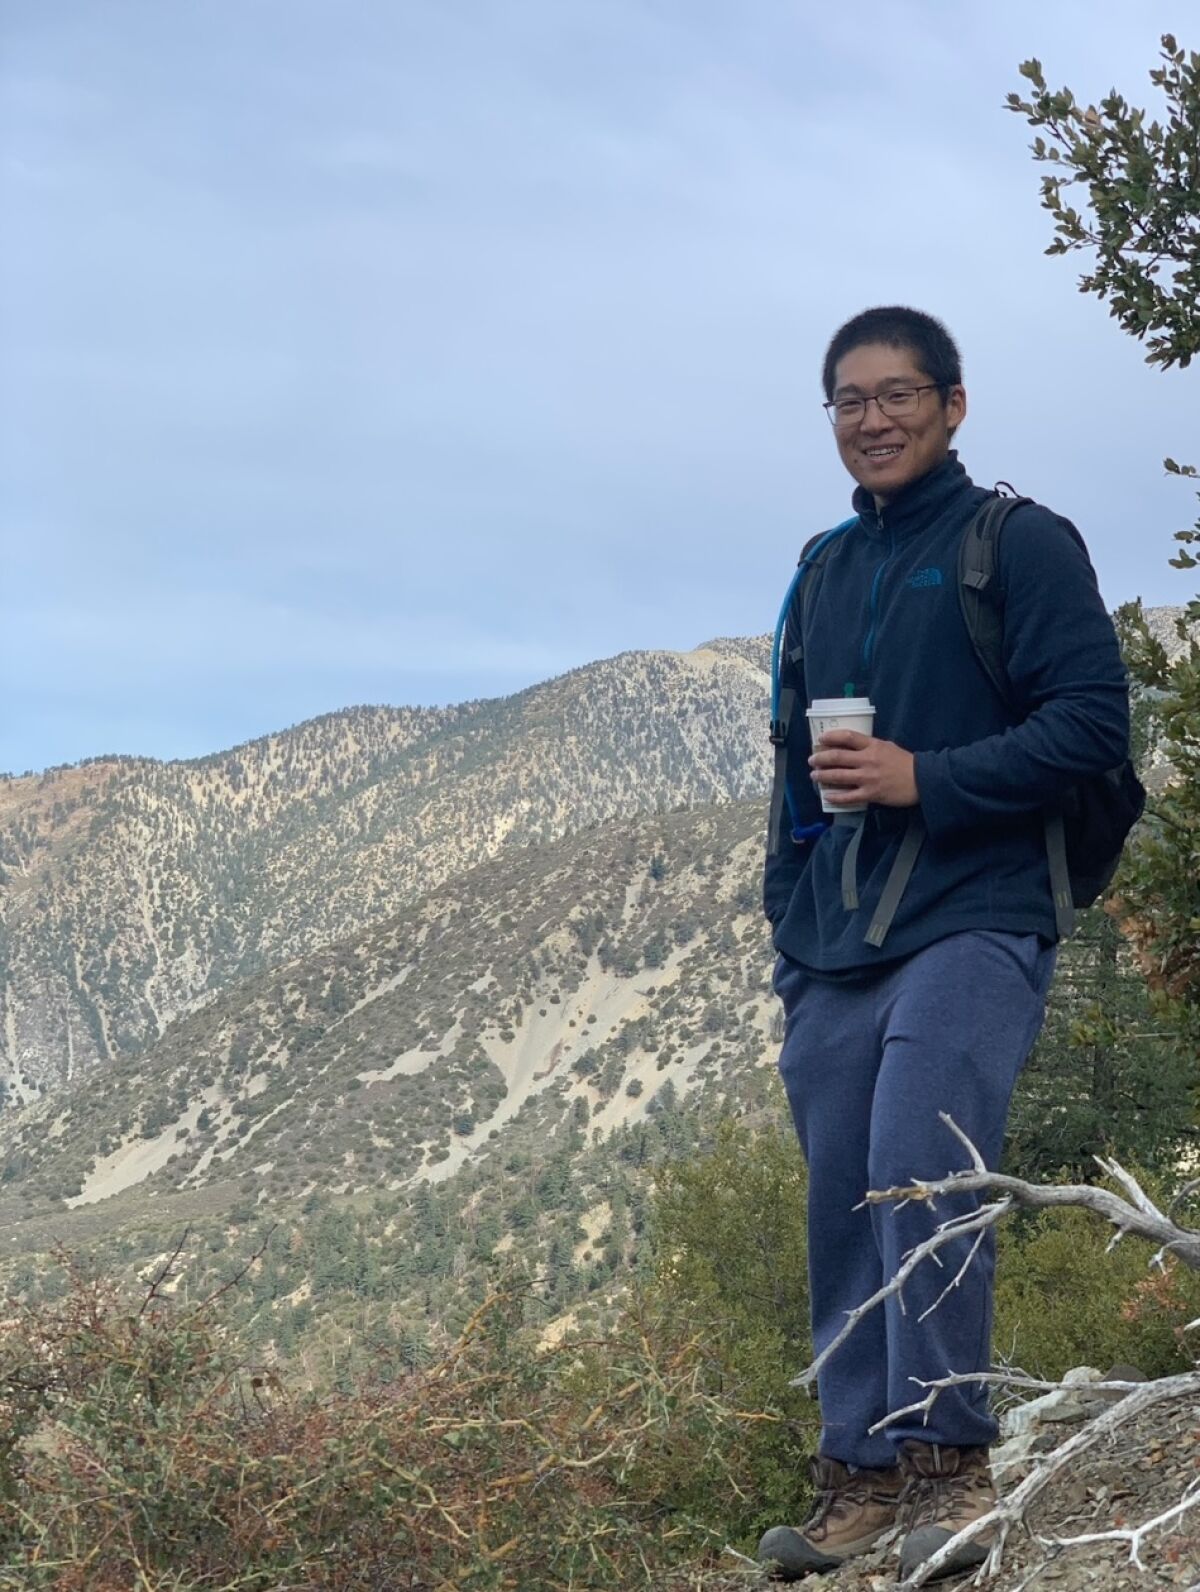 A hiker holds a cup of coffee in the mountains